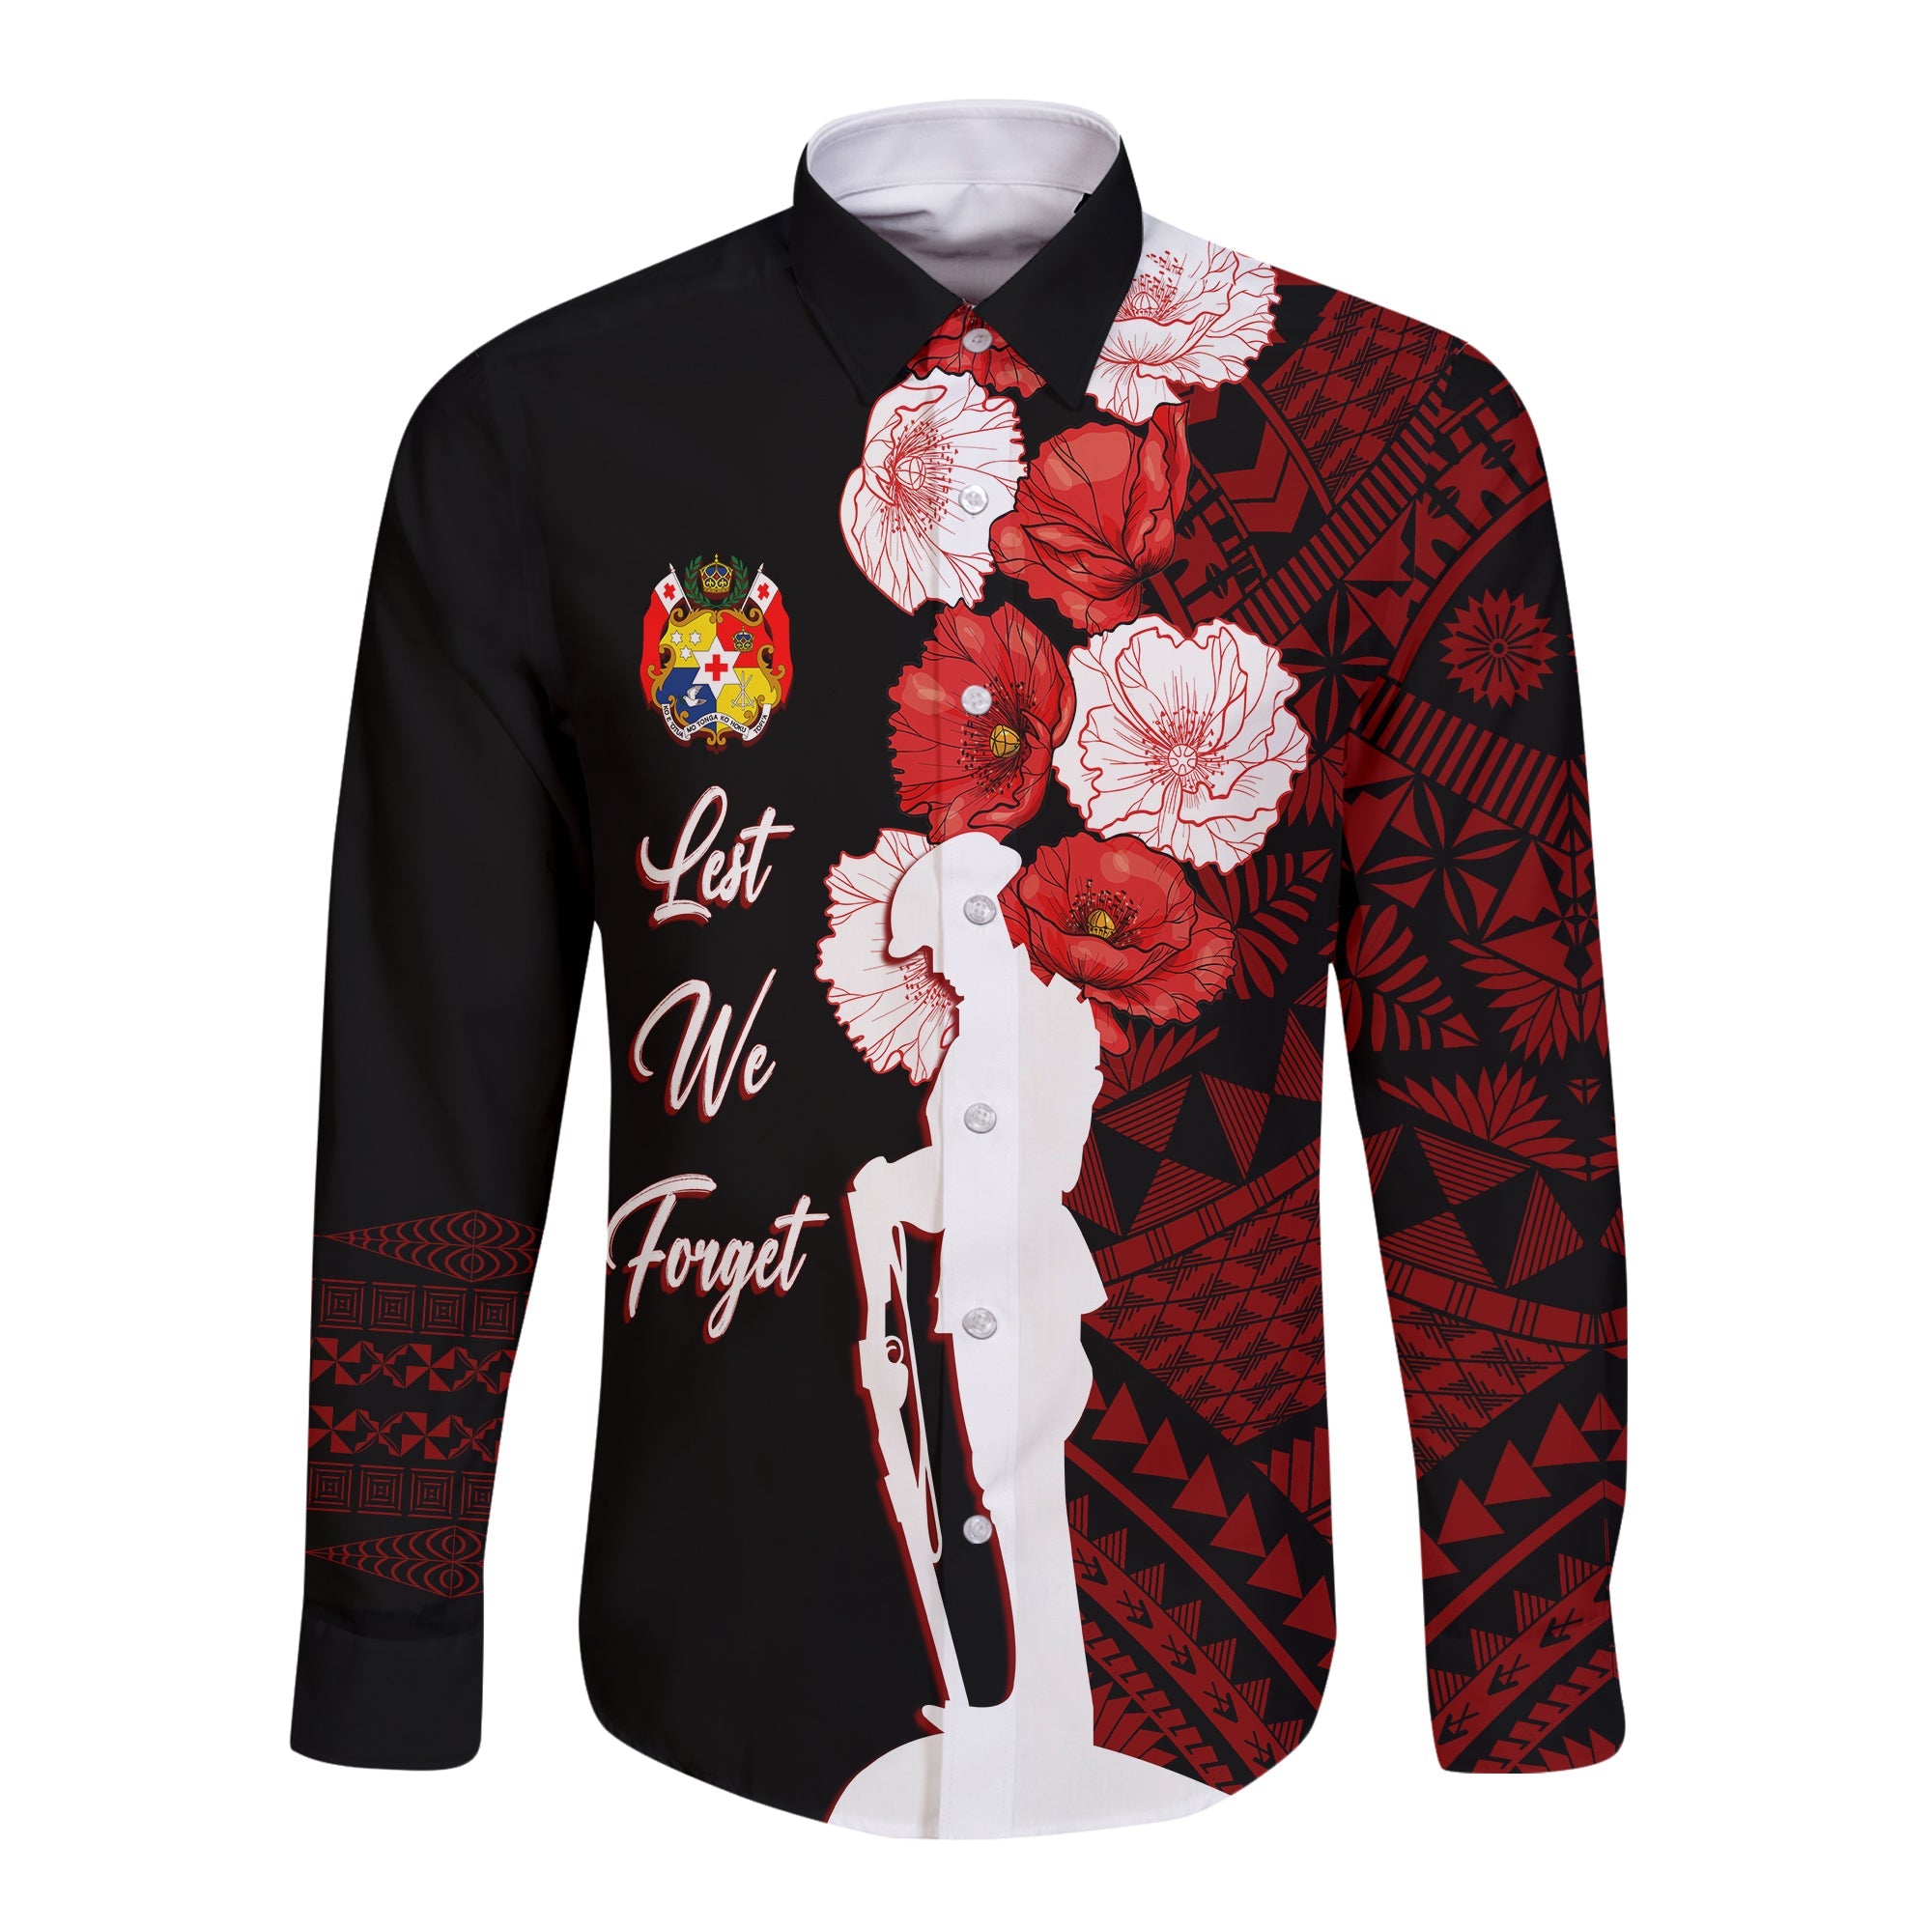 Tonga Long Sleeves Button Shirt Anzac Day Lest We Forget LT7 Unisex Black - Polynesian Pride